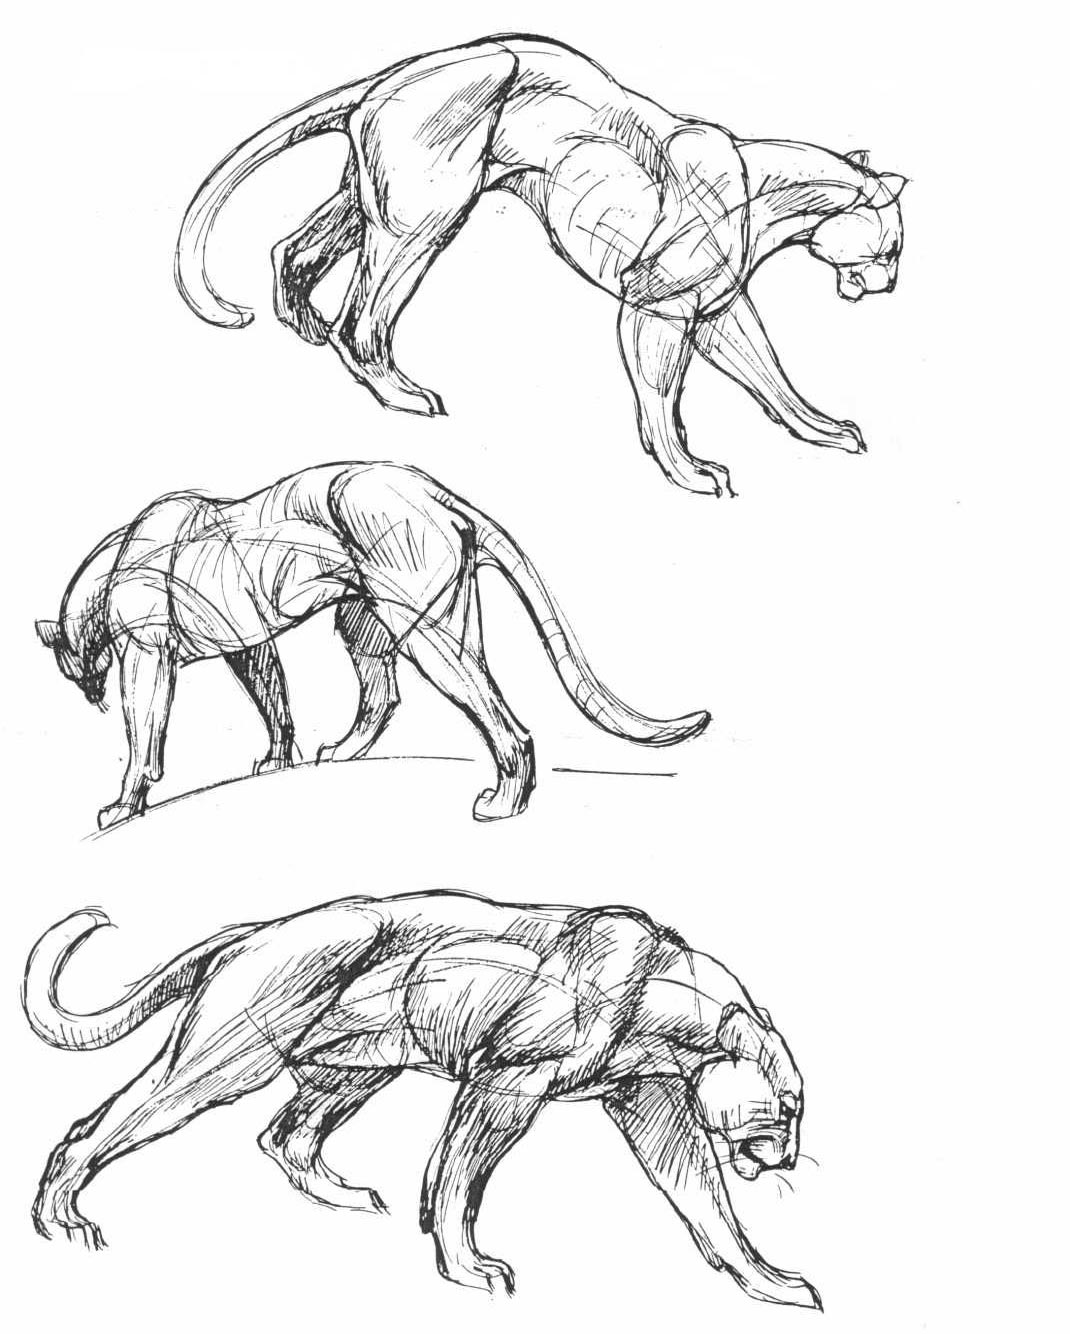 Panther drawing reference